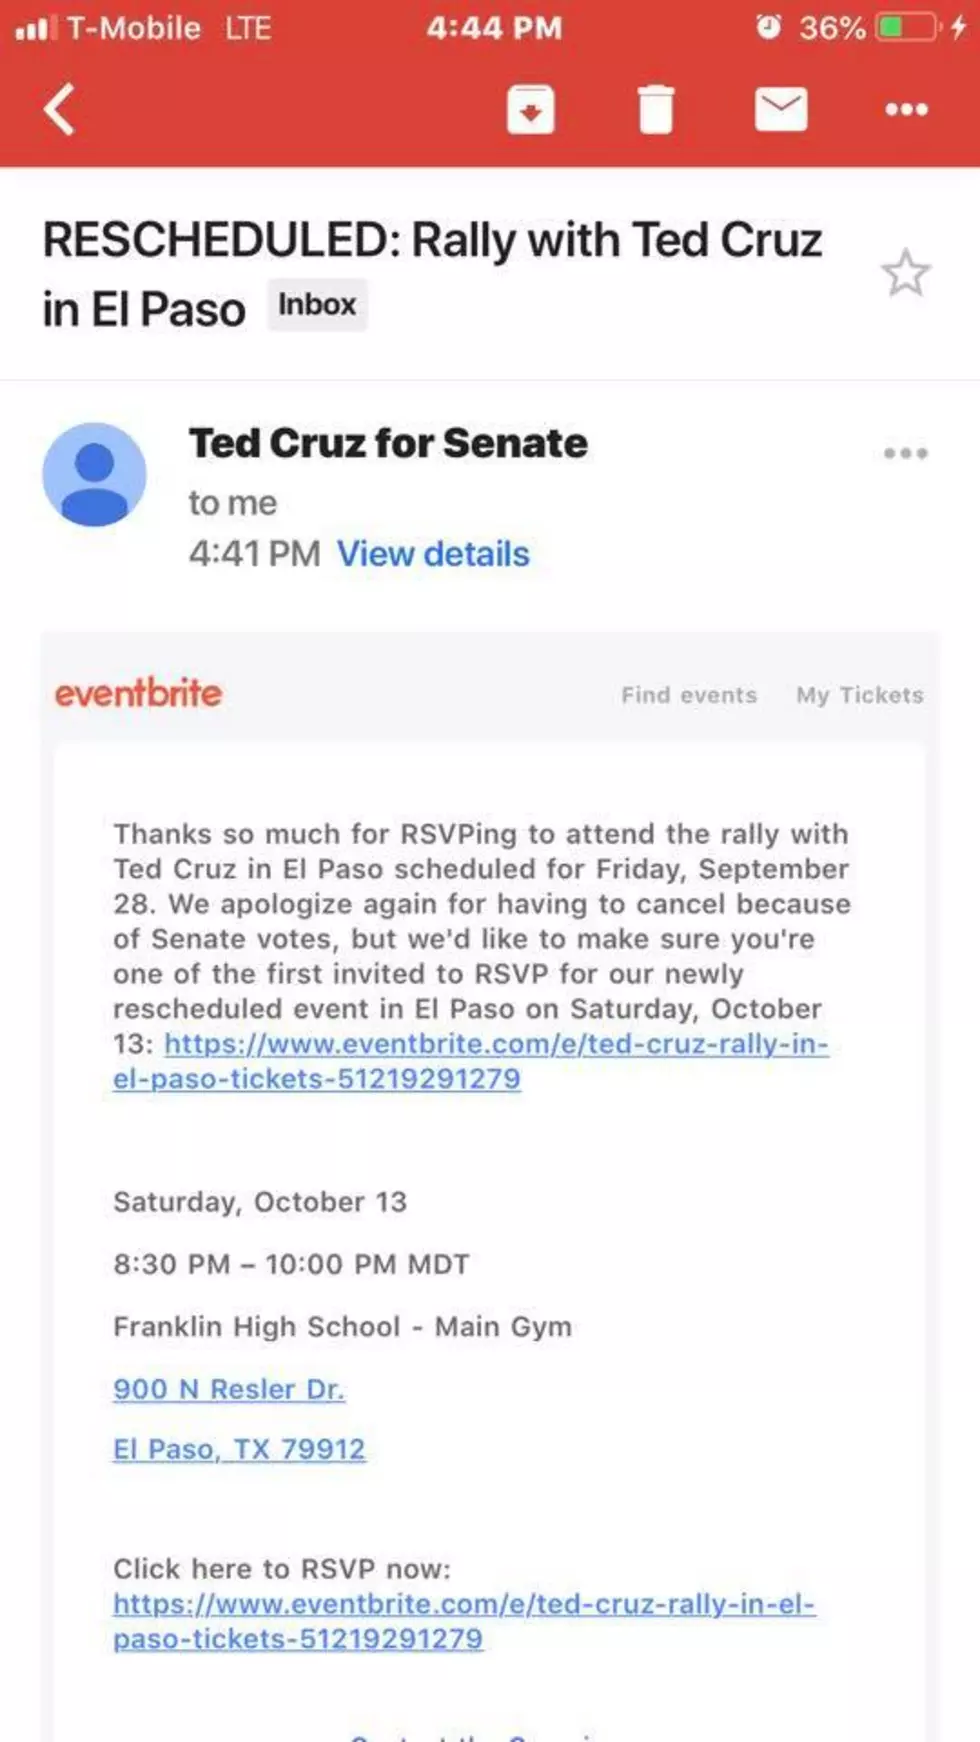 Ted Cruz Reschedules His Cancelled Political Rally For This Weekend At Franklin High School